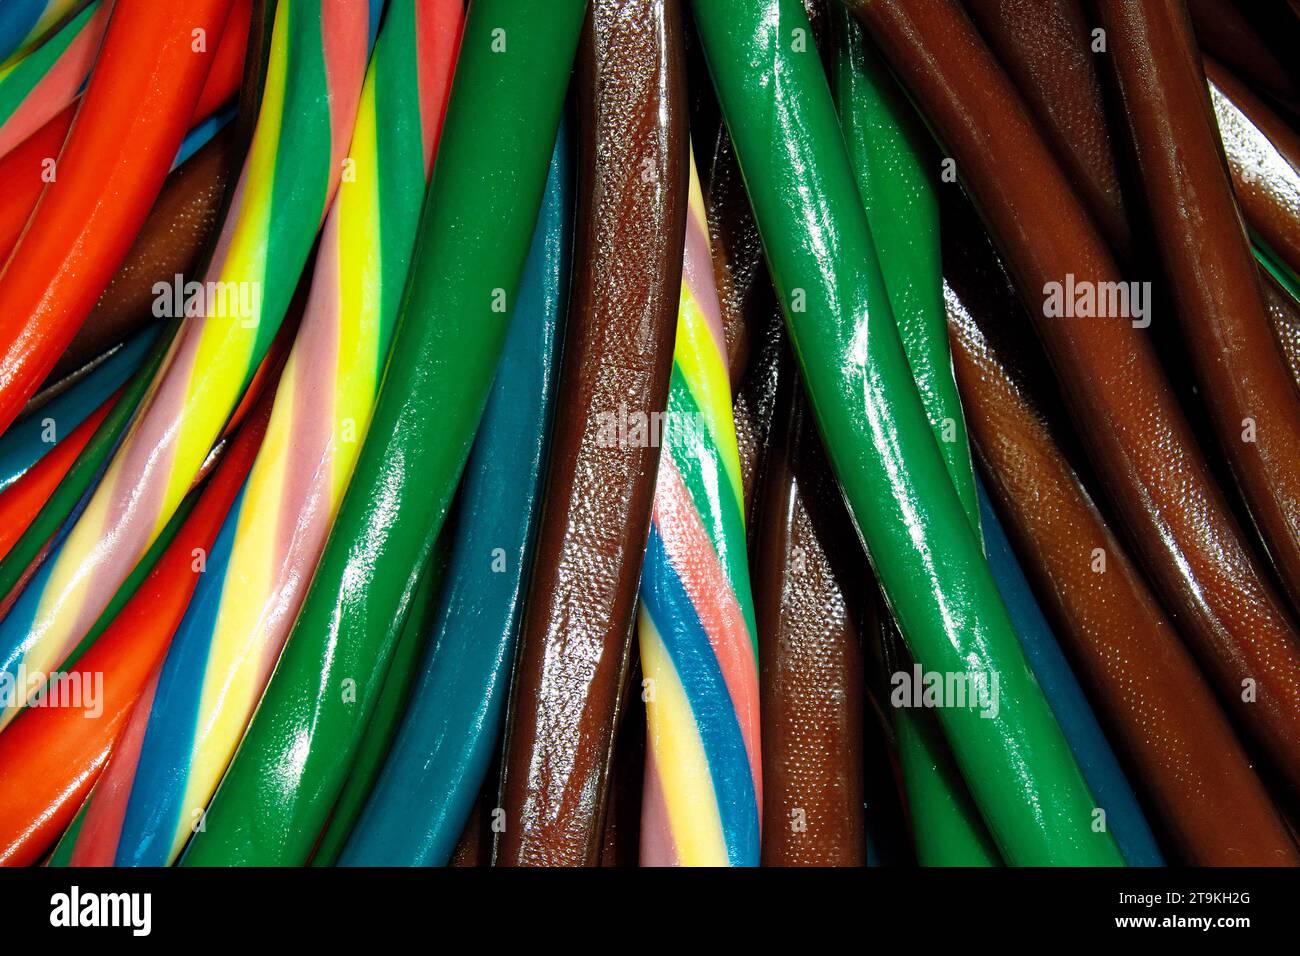 a top-down view of colorful candy sticks in red, green, blue, yellow, and orange, arranged in a pattern. Stock Photo